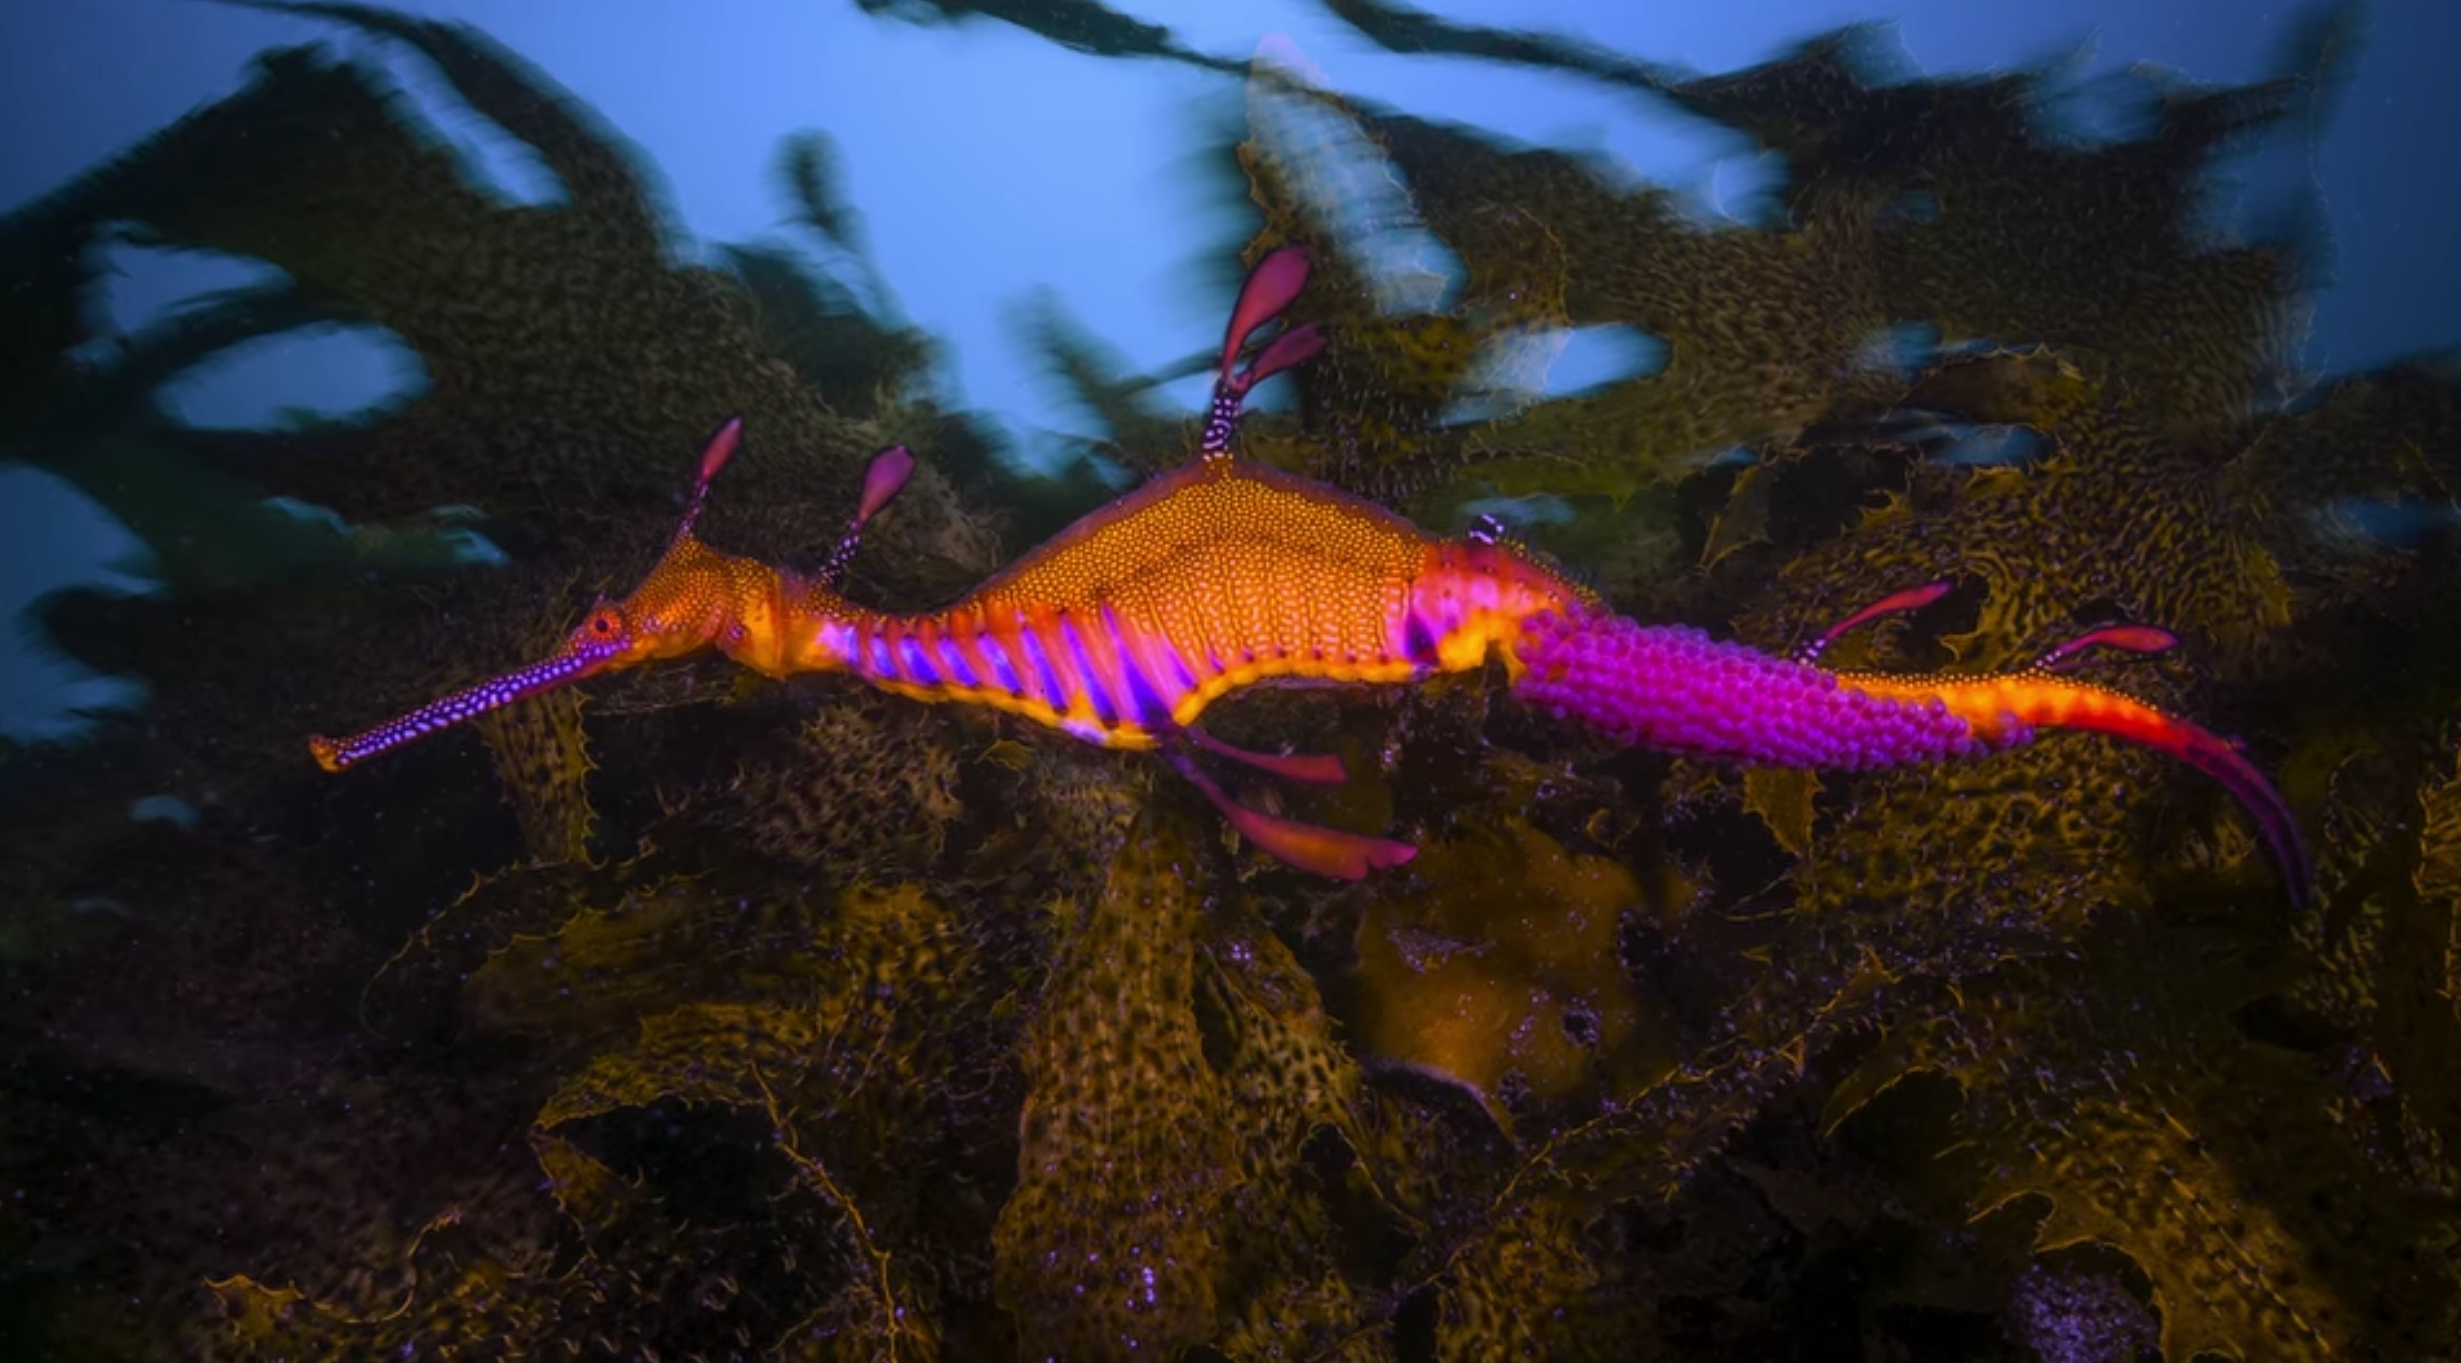 a wild weedy seadragon, a near-threatened species responding to the effect of climate change on the ocean.